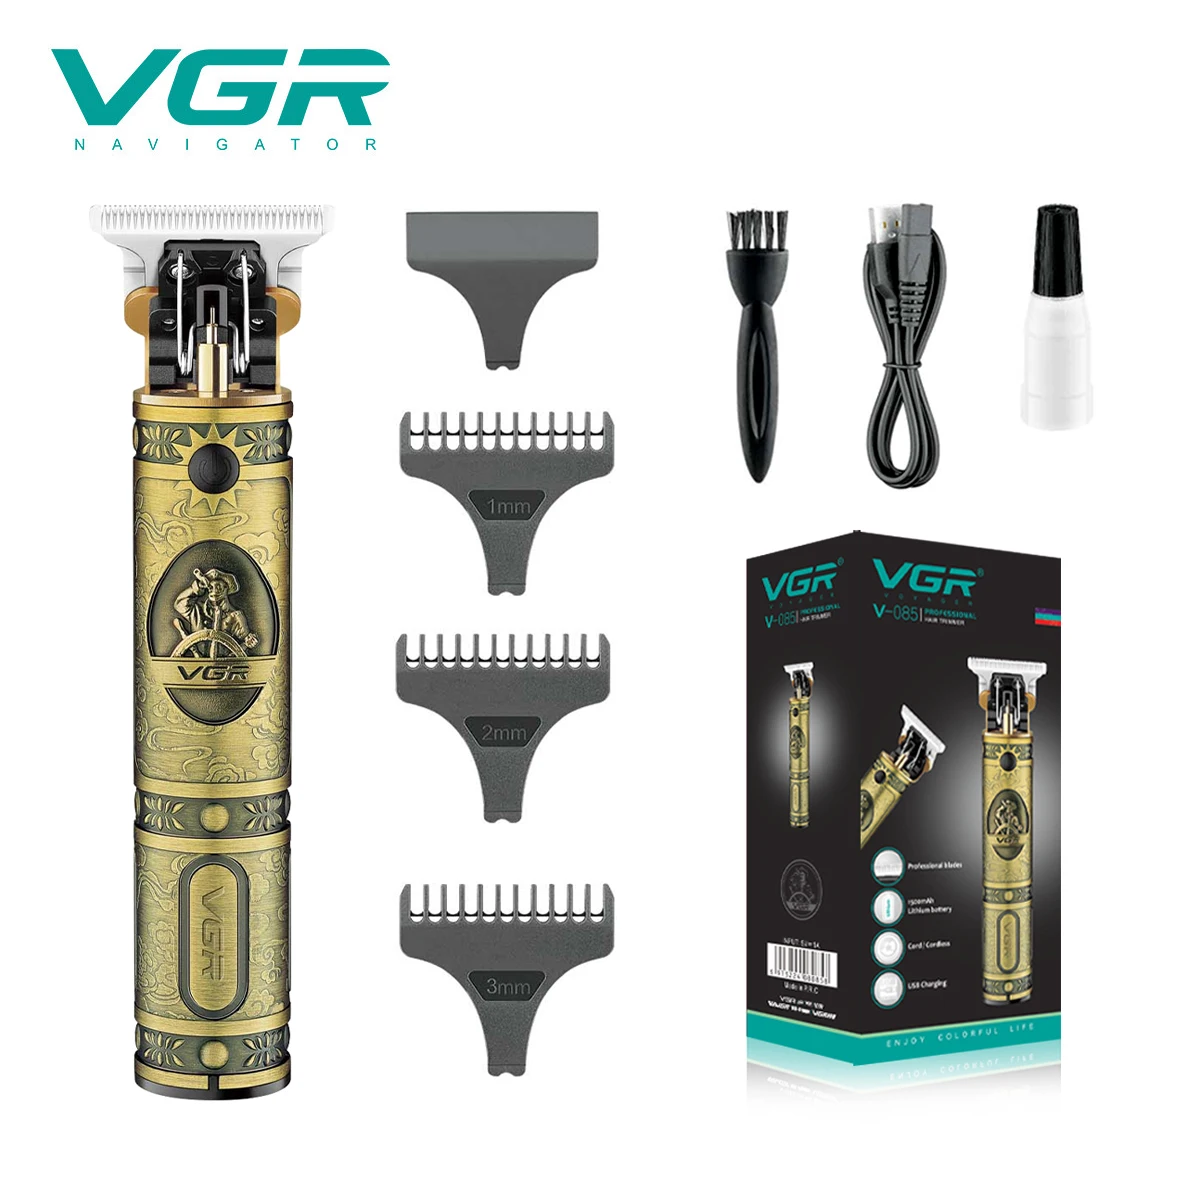 

VGR V-085 Barber Hair Cut Machine Beard Trimmer Hair Clippers Professional Rechargeable Electric Hair Trimmer Cordless for Men